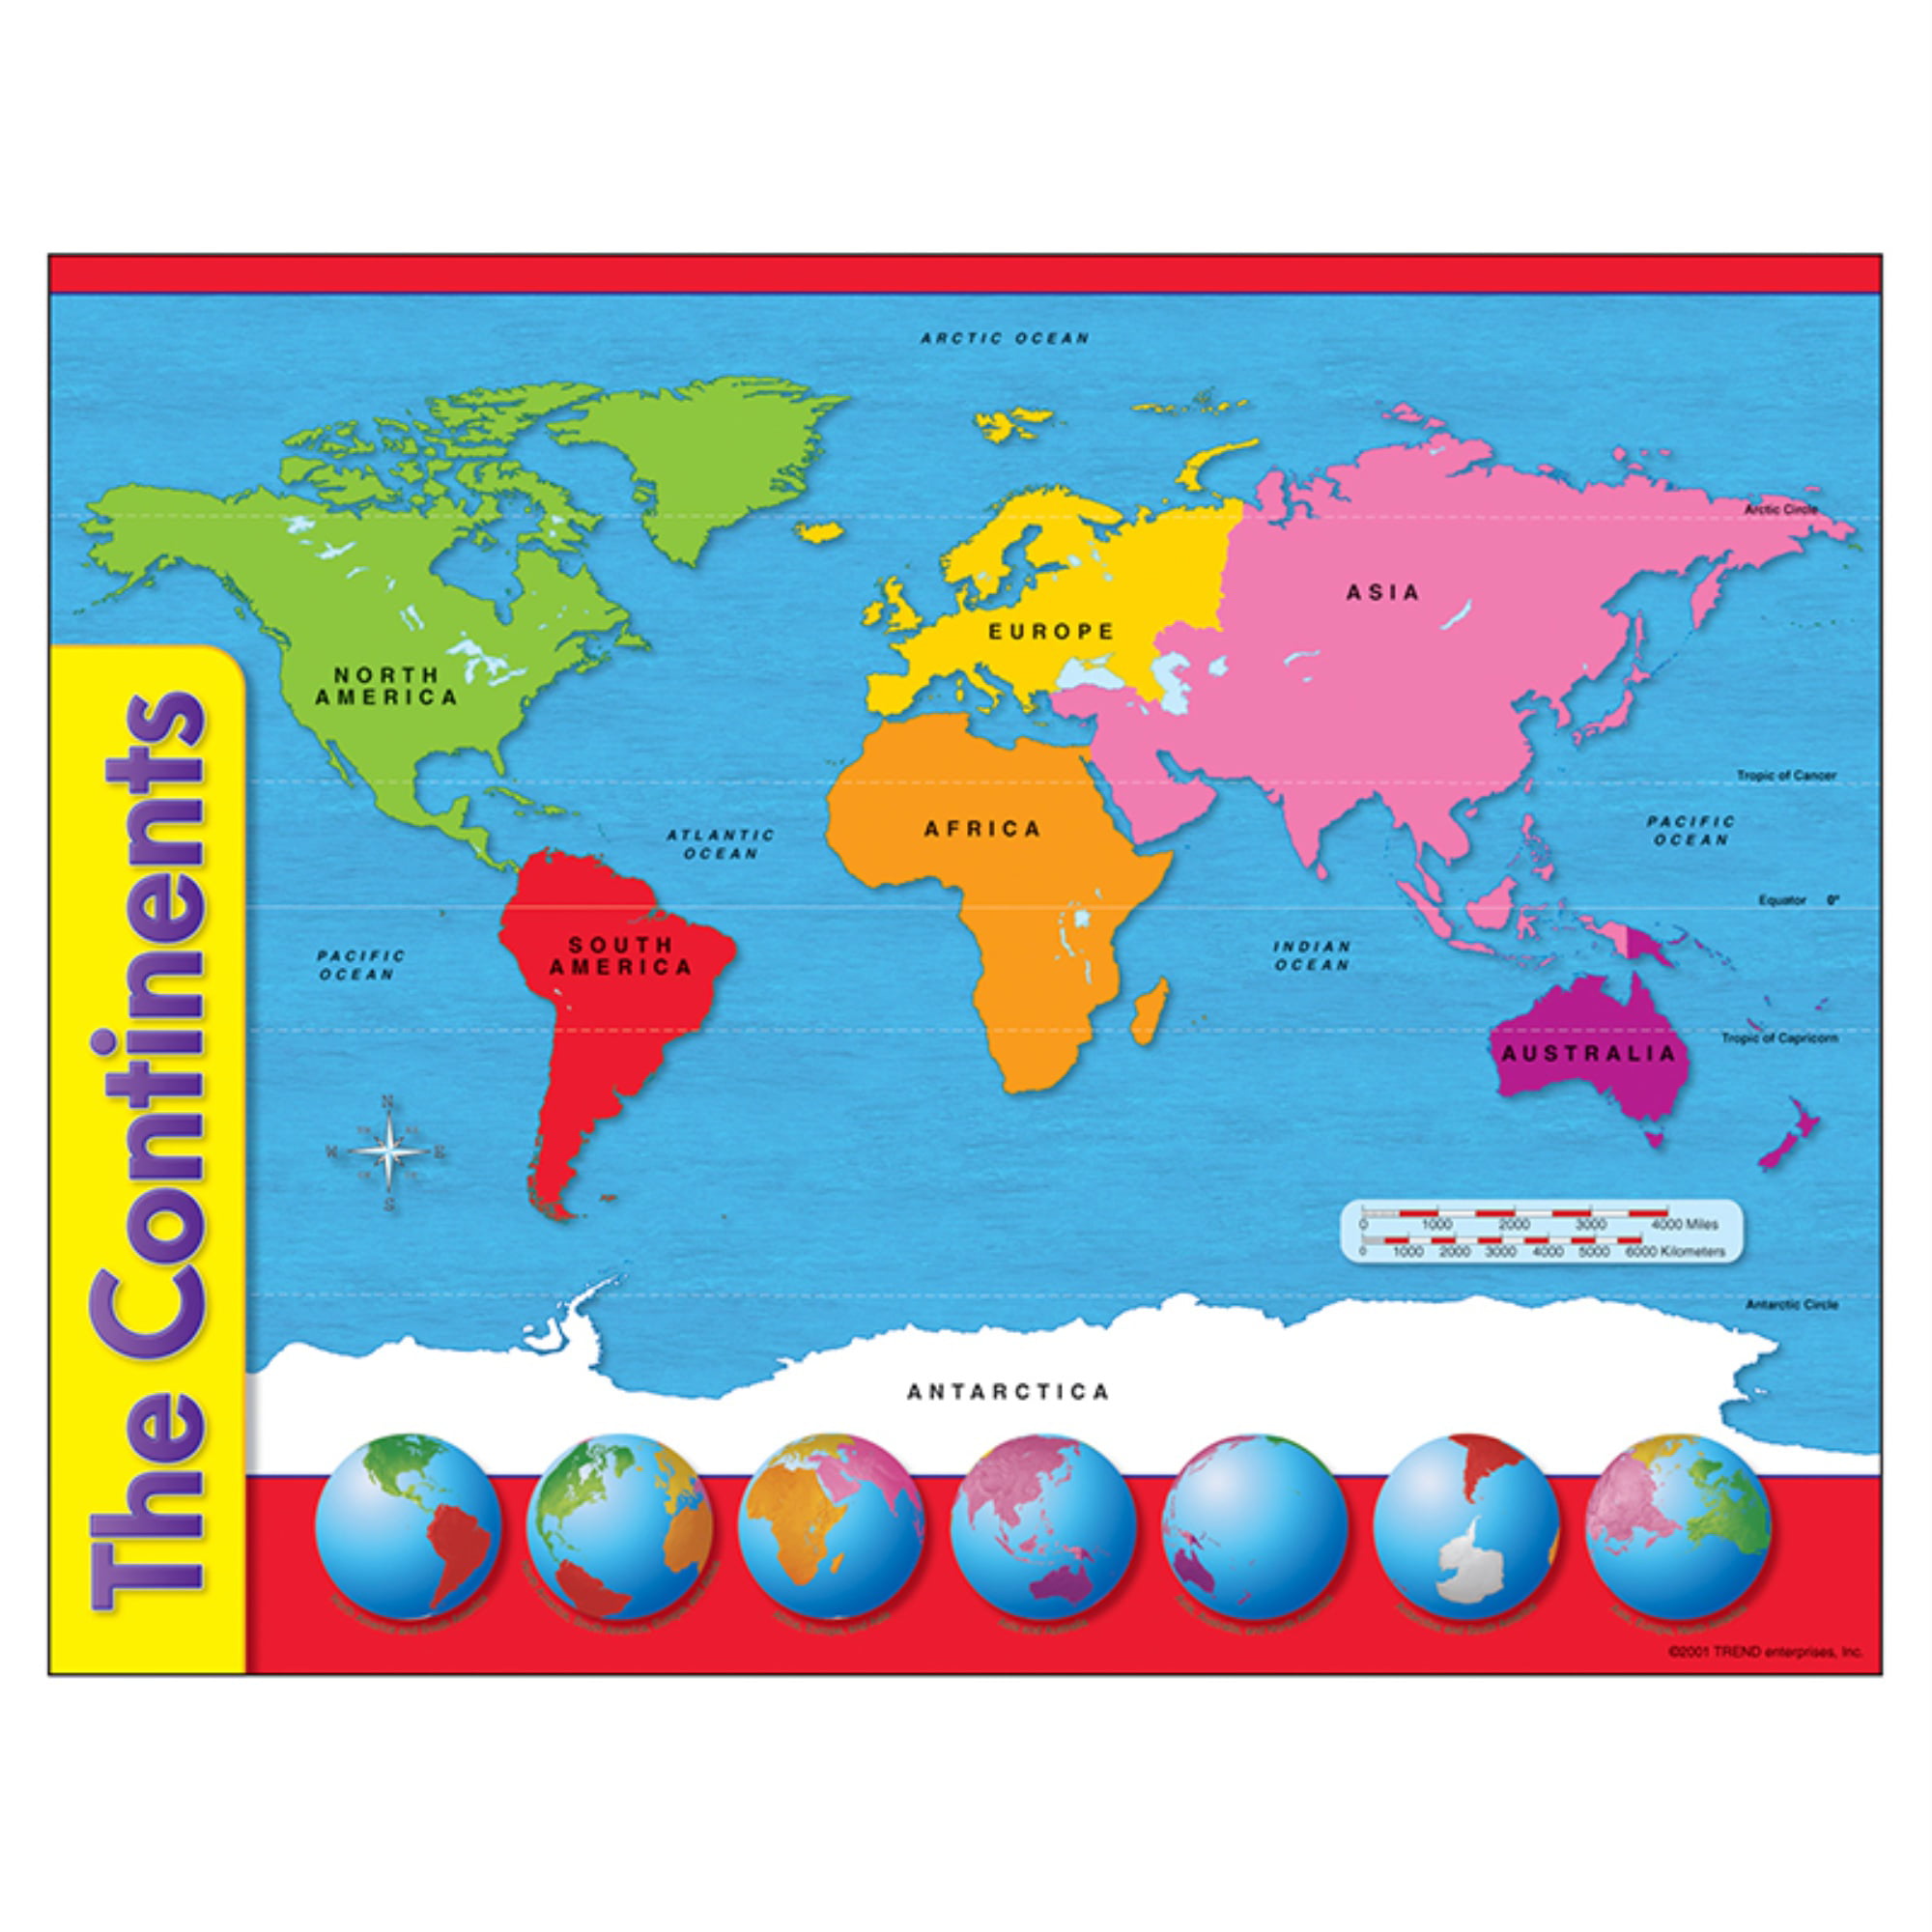 4 x 4 inches cool collectible New Antarctica  Decal "its a harsh Continent" 